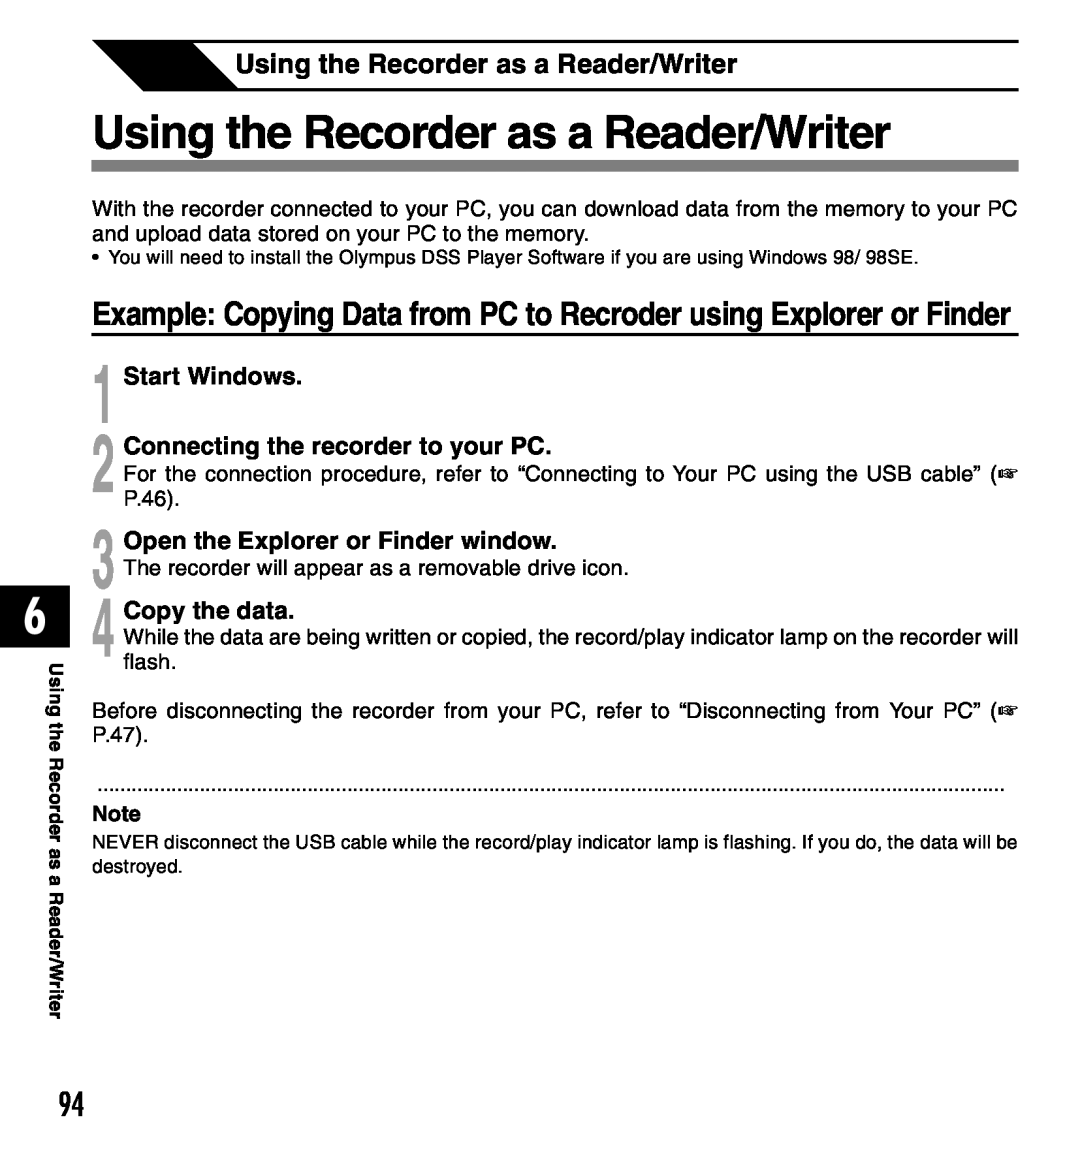 Olympus DM-10 Using the Recorder as a Reader/Writer, Start Windows 2 Connecting the recorder to your PC, Copy the data 